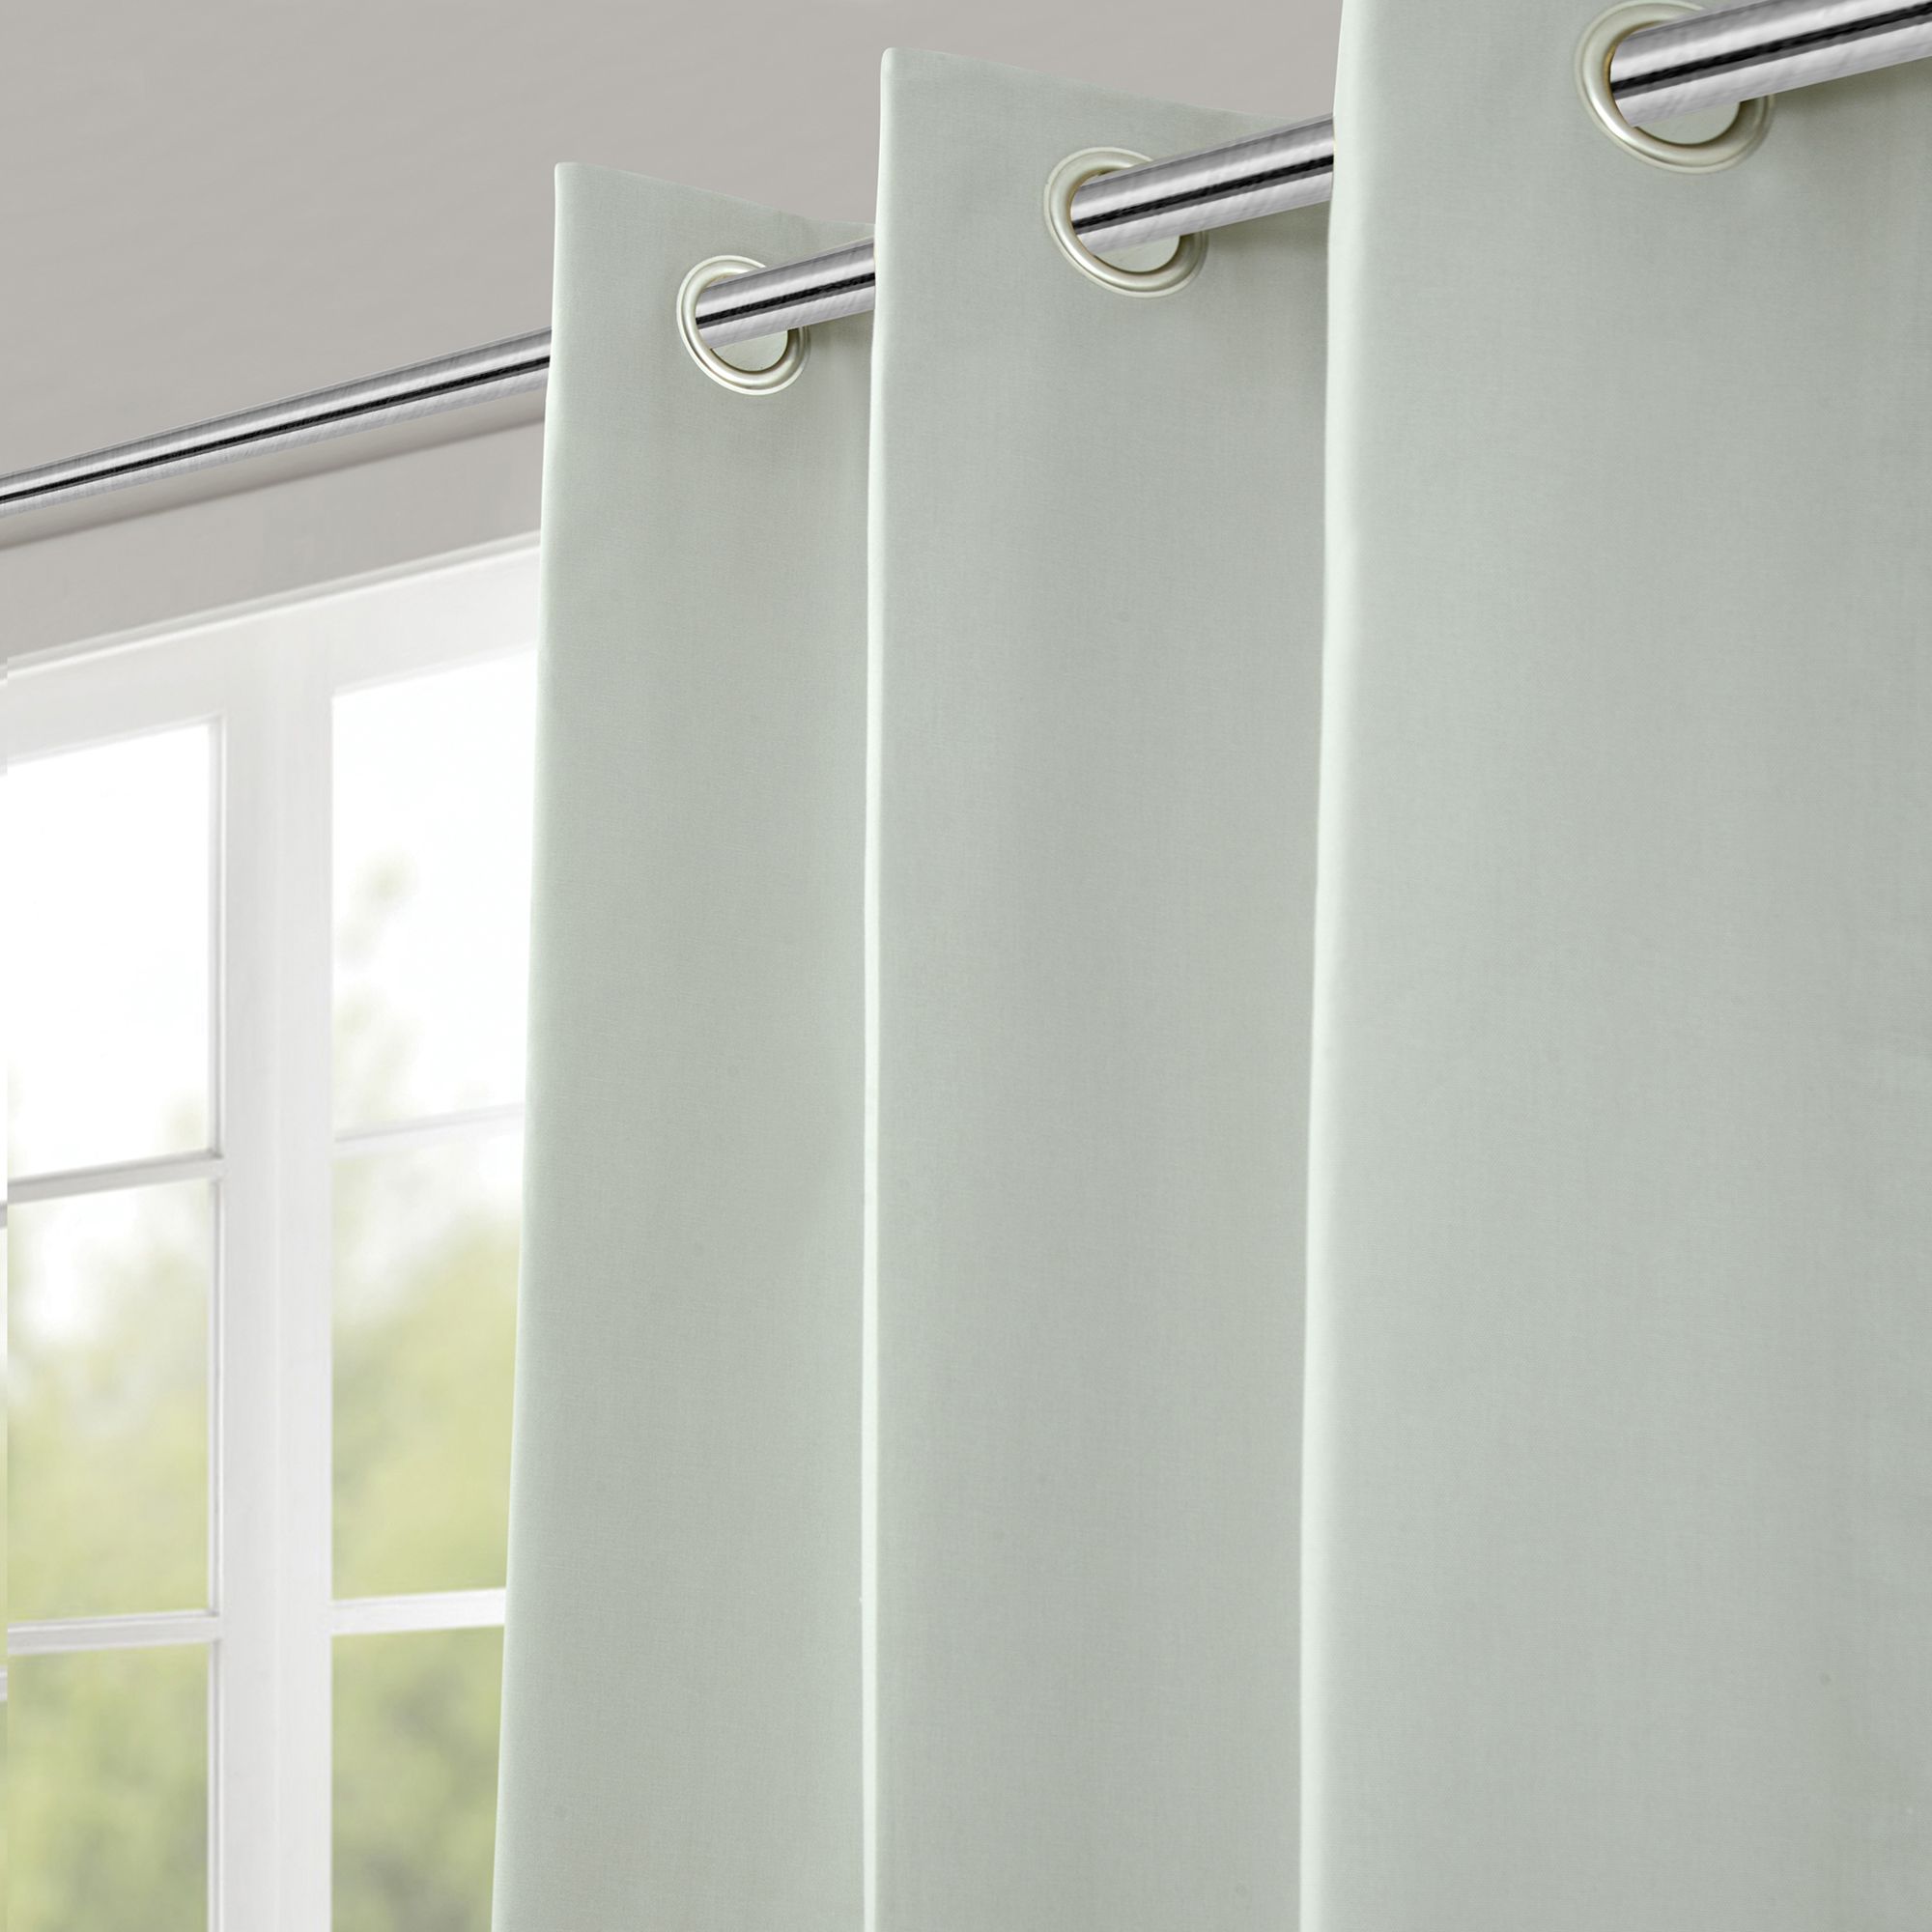 Hiva Light grey Solid dyed Lined Eyelet Curtain (W)167cm (L)228cm, Pair